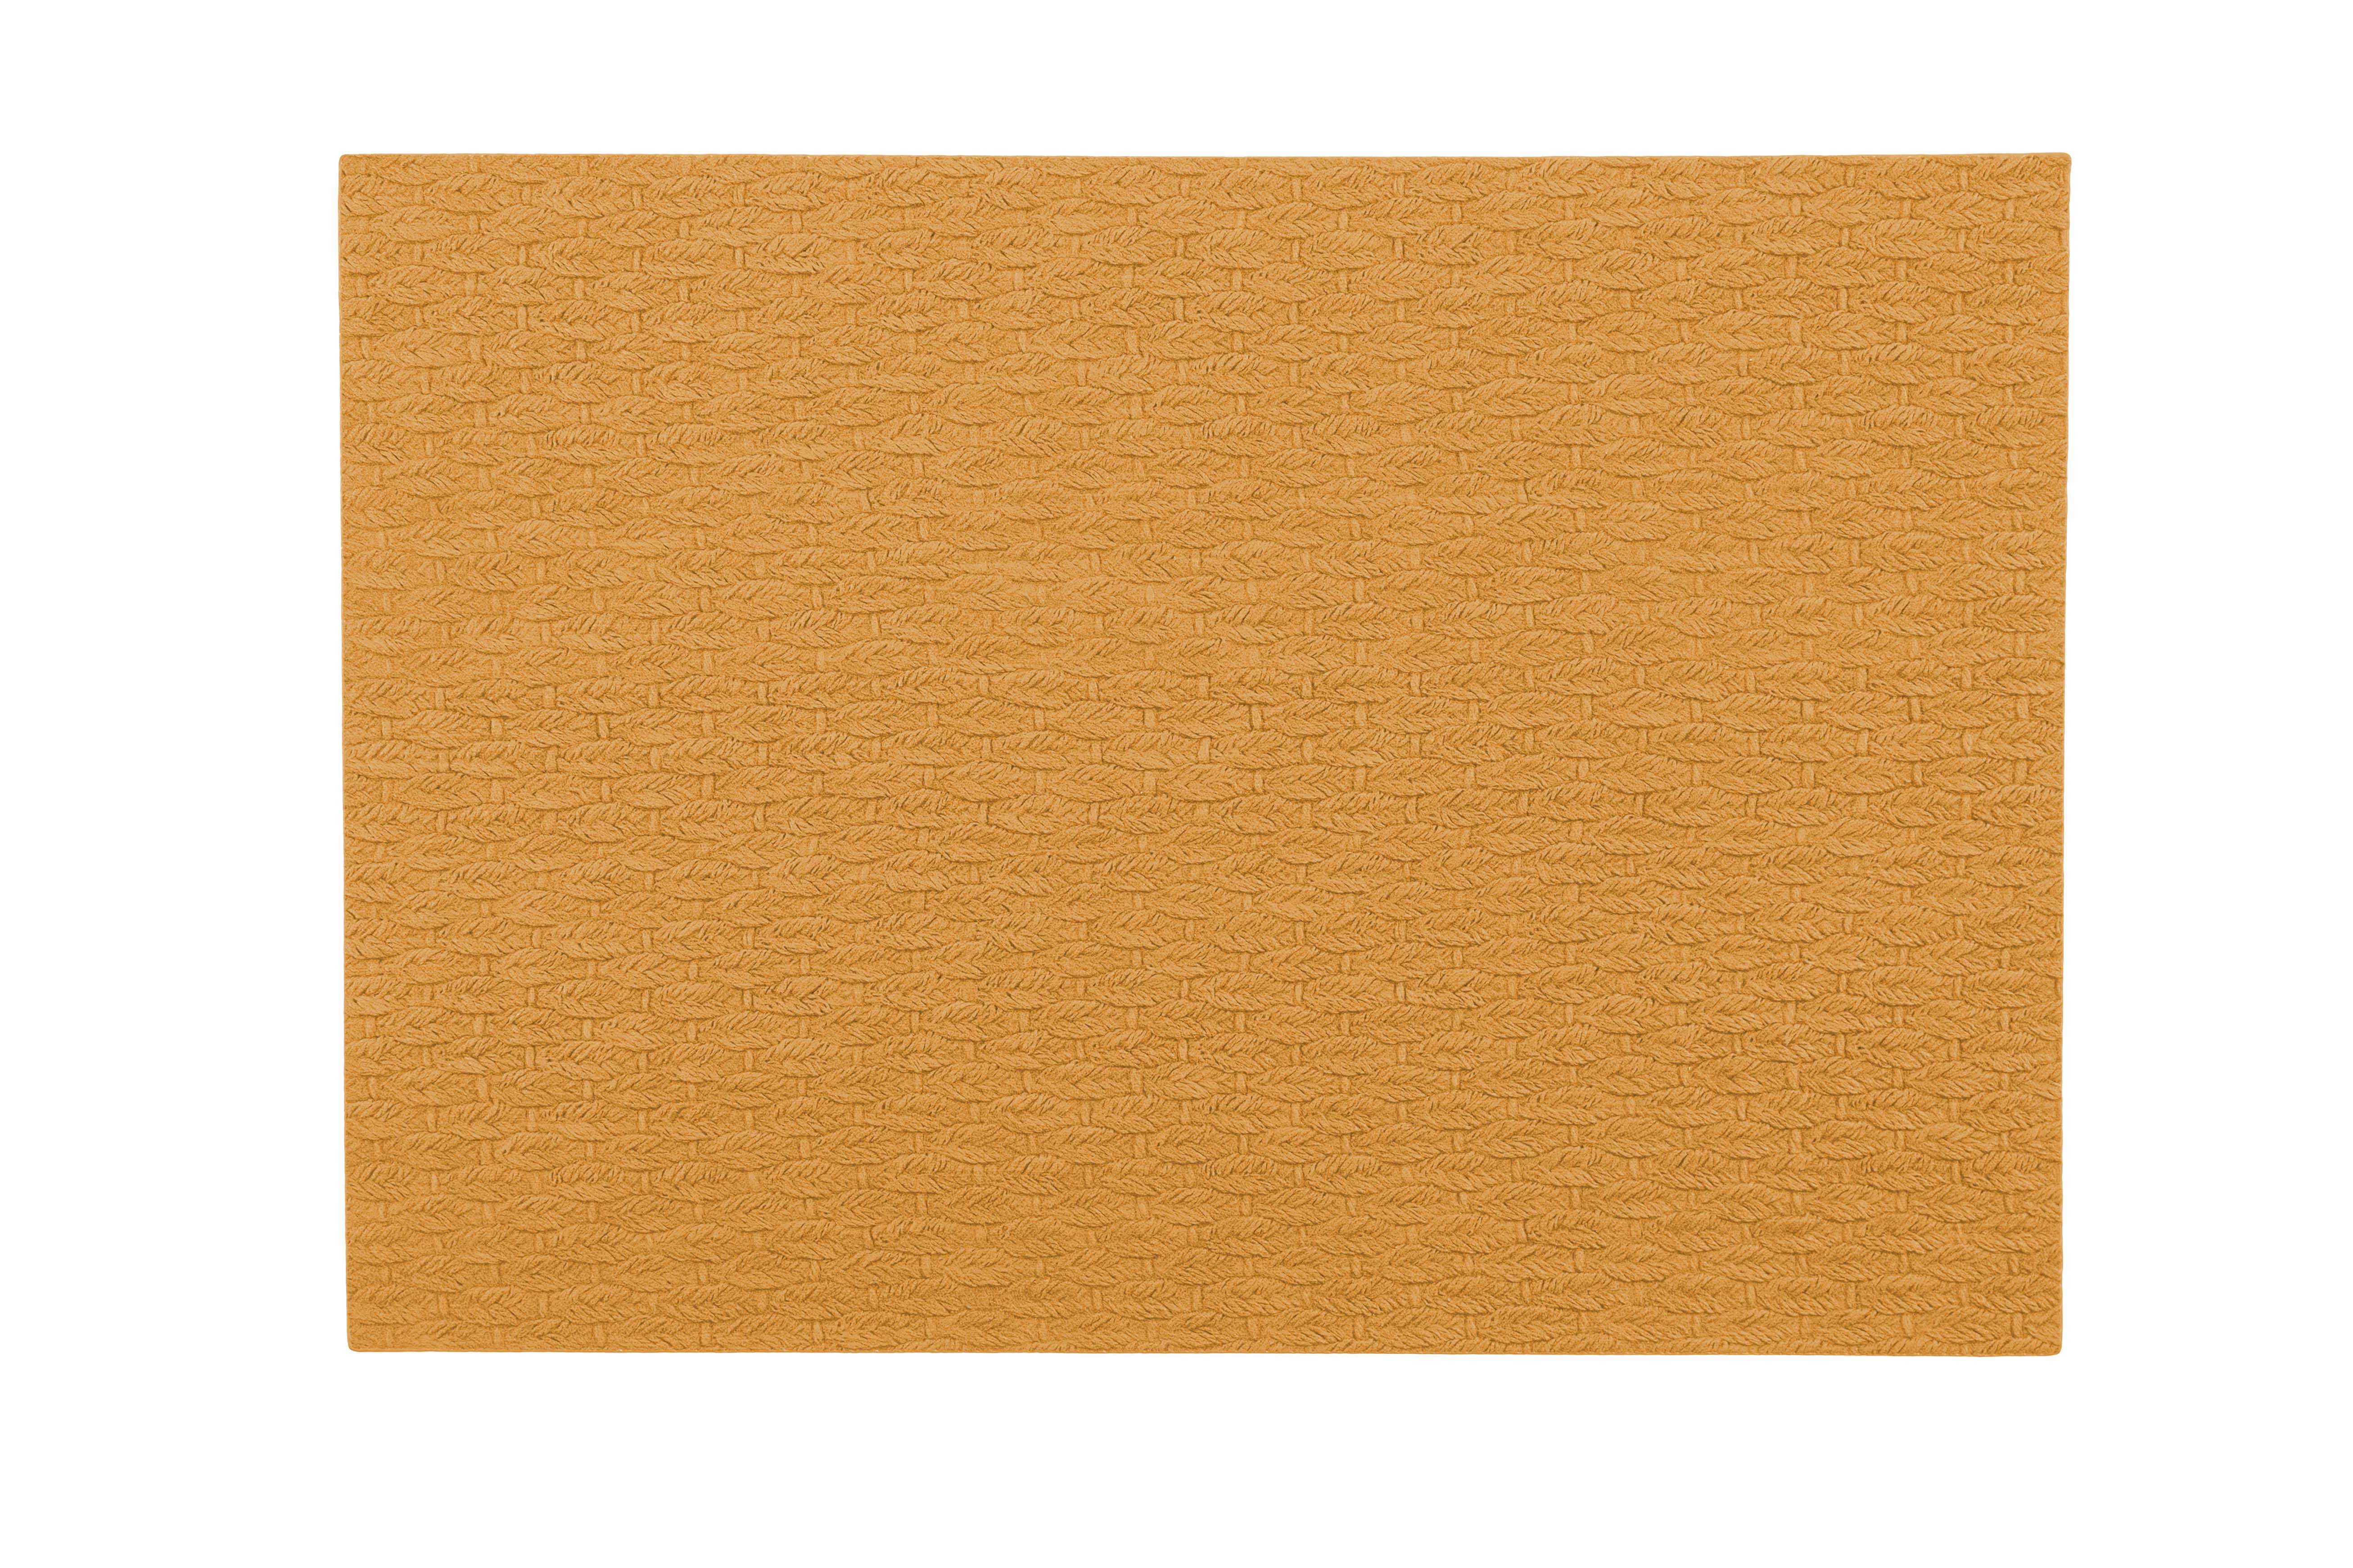 Placemat ARBIN - Leather look imitation- 45x33cm, taupe